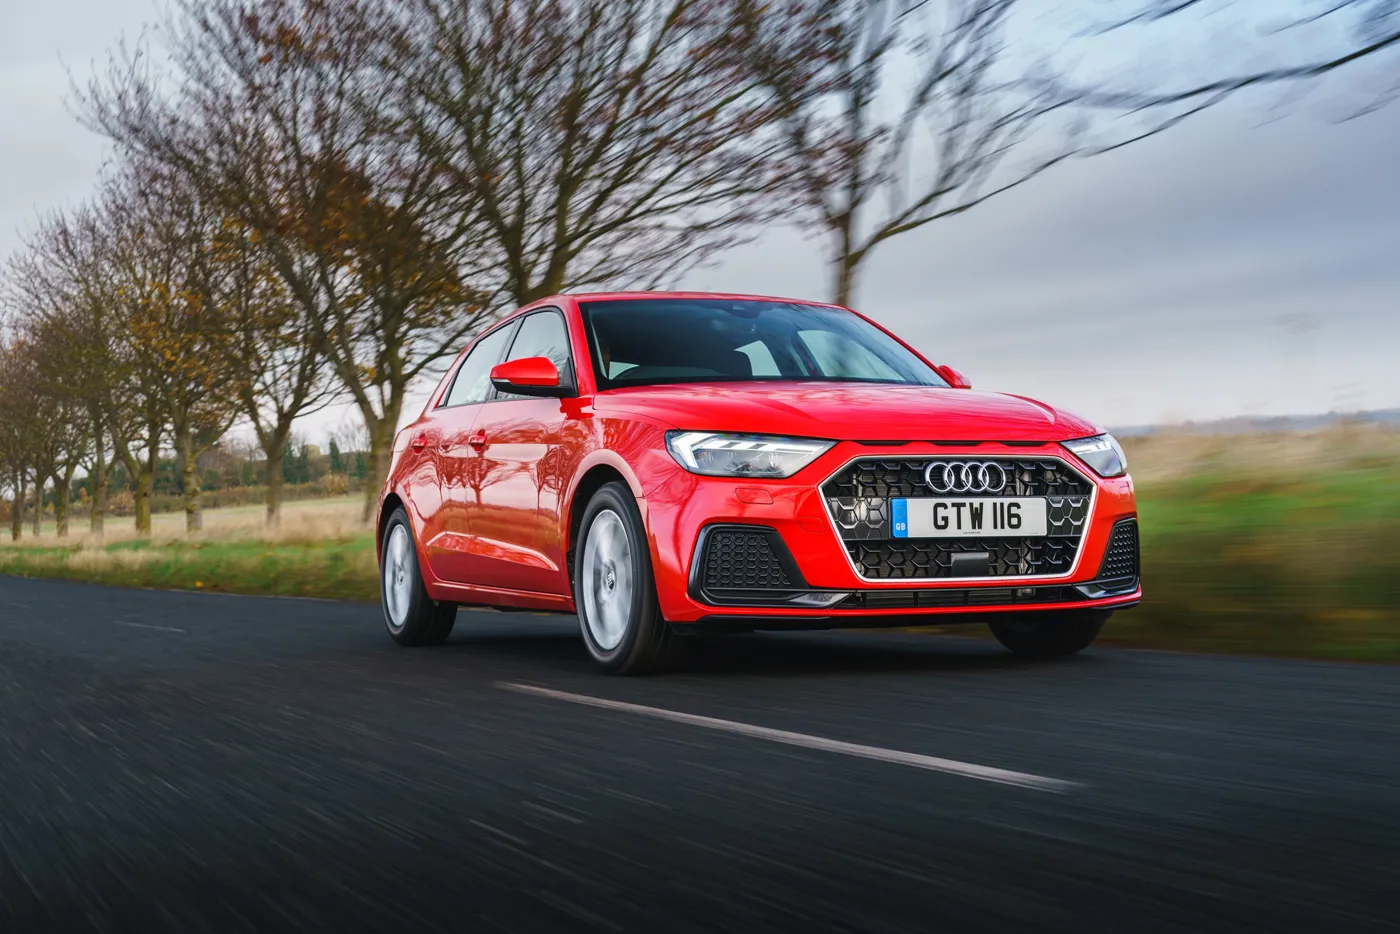 Audi A1 first drive, a small car with big car features